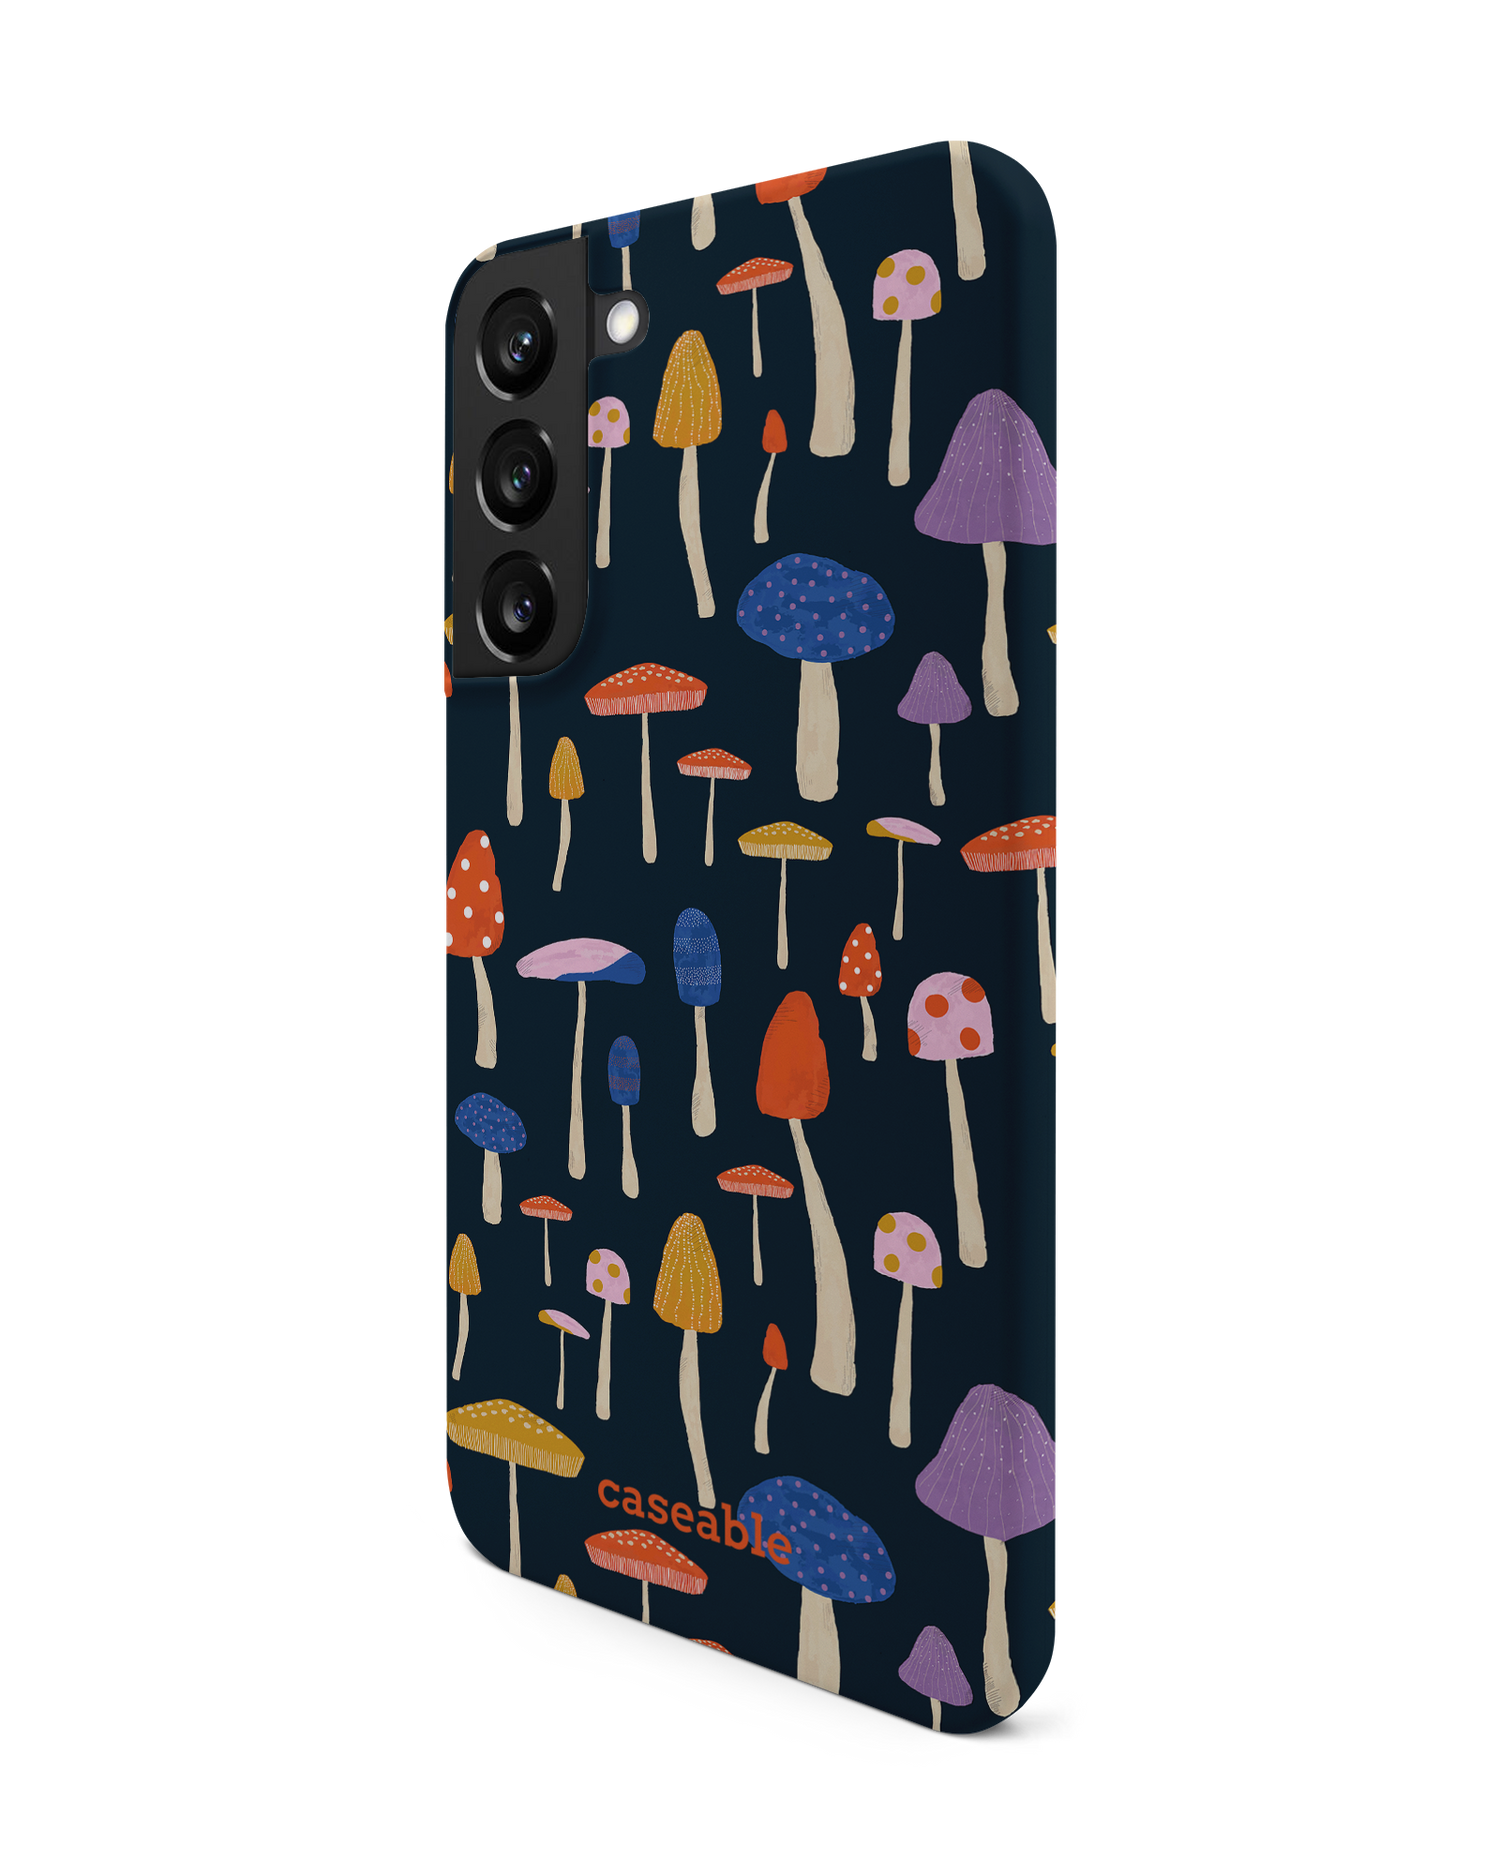 Mushroom Delights Hard Shell Phone Case Samsung Galaxy S22 Plus 5G: View from the right side